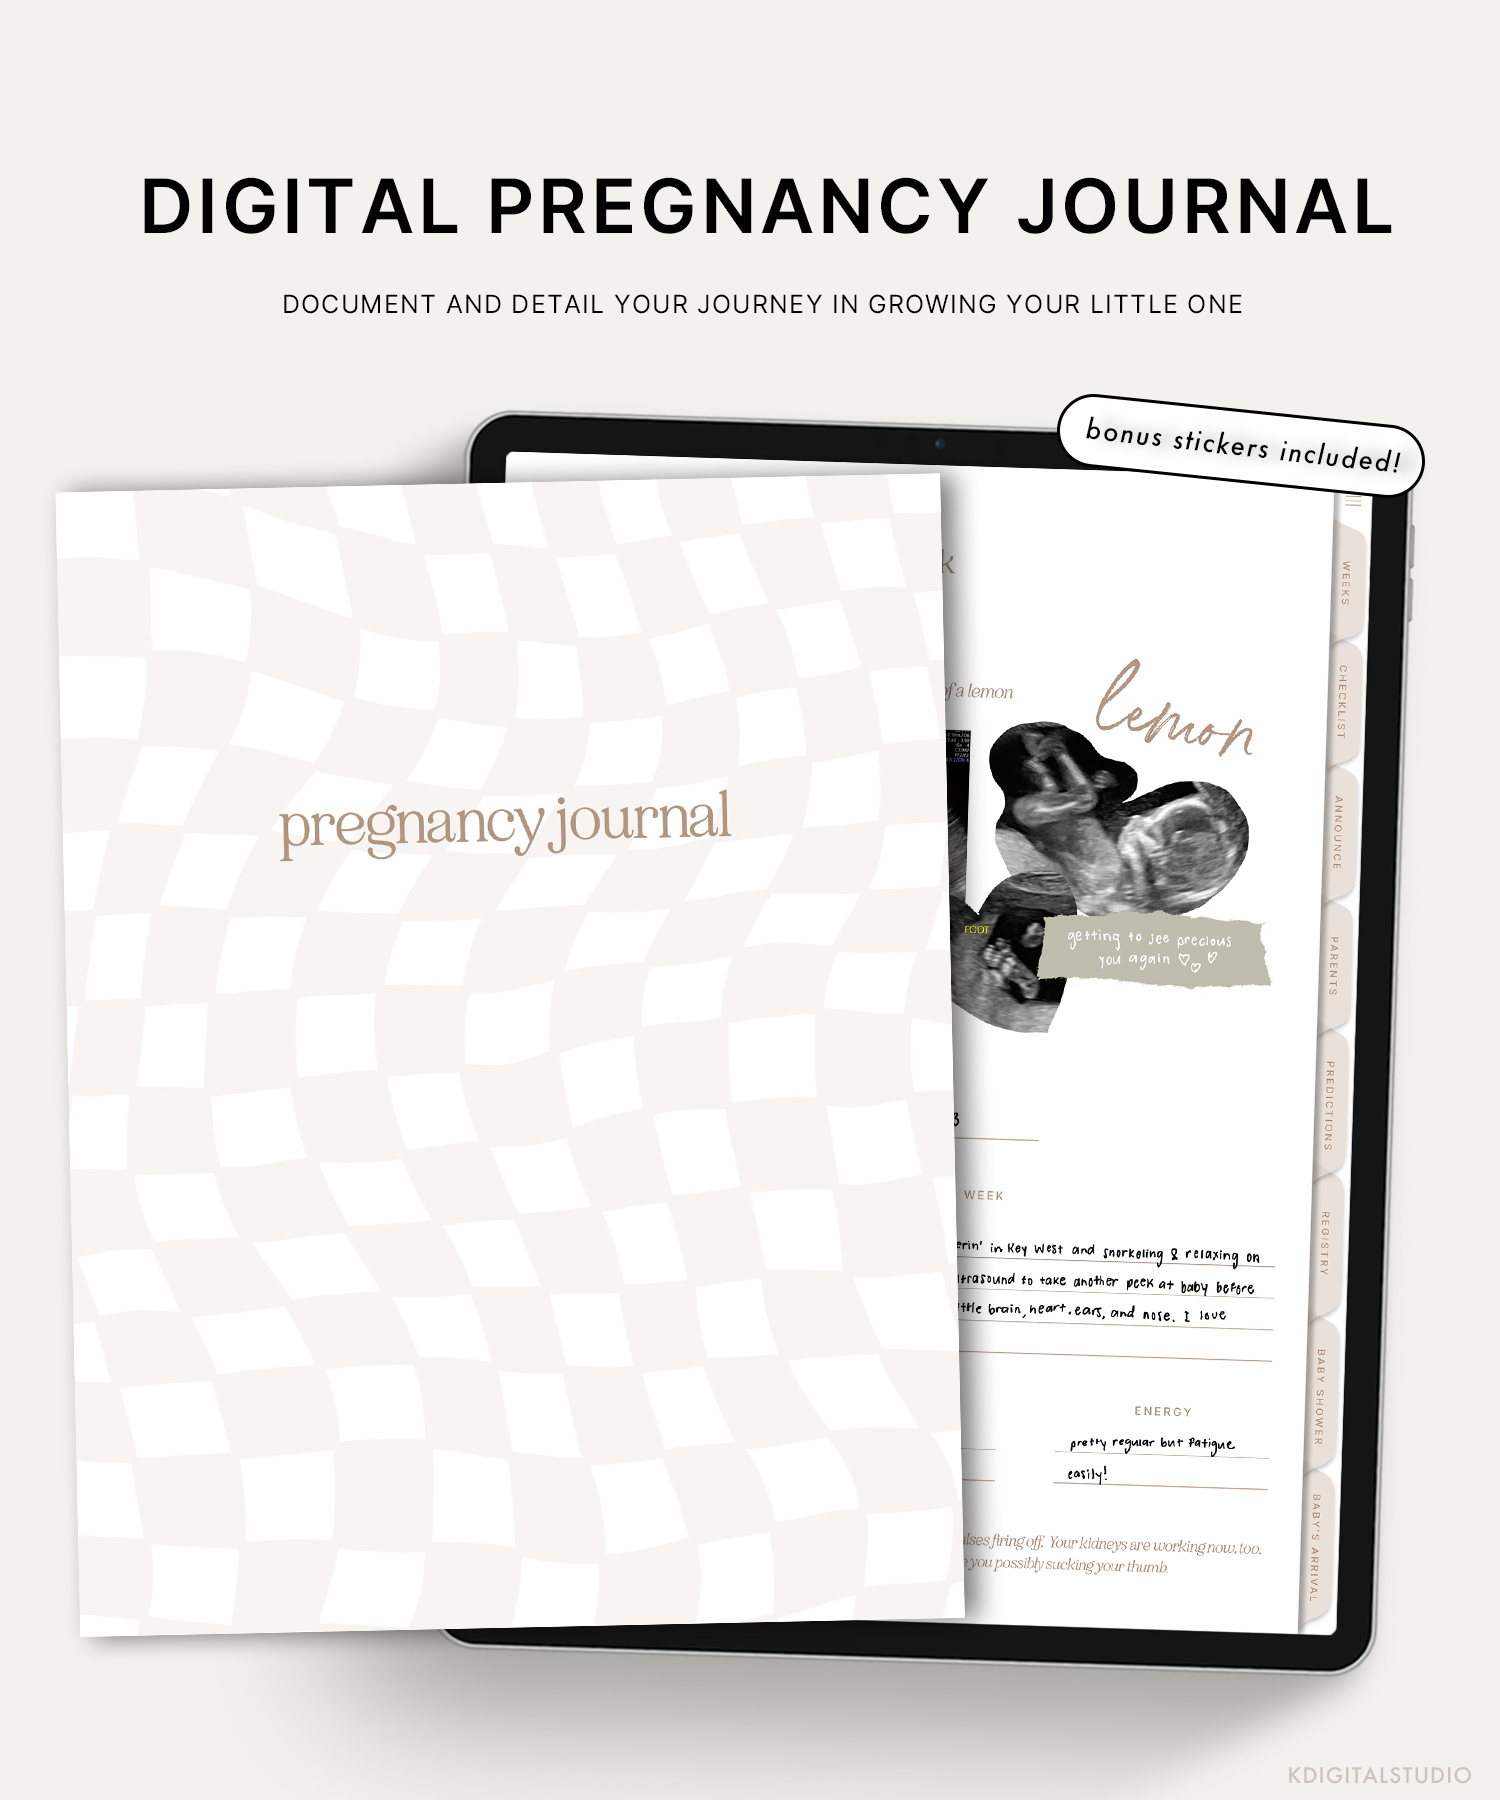 Document and detail your journey in growing your little one with the digital pregnancy journal